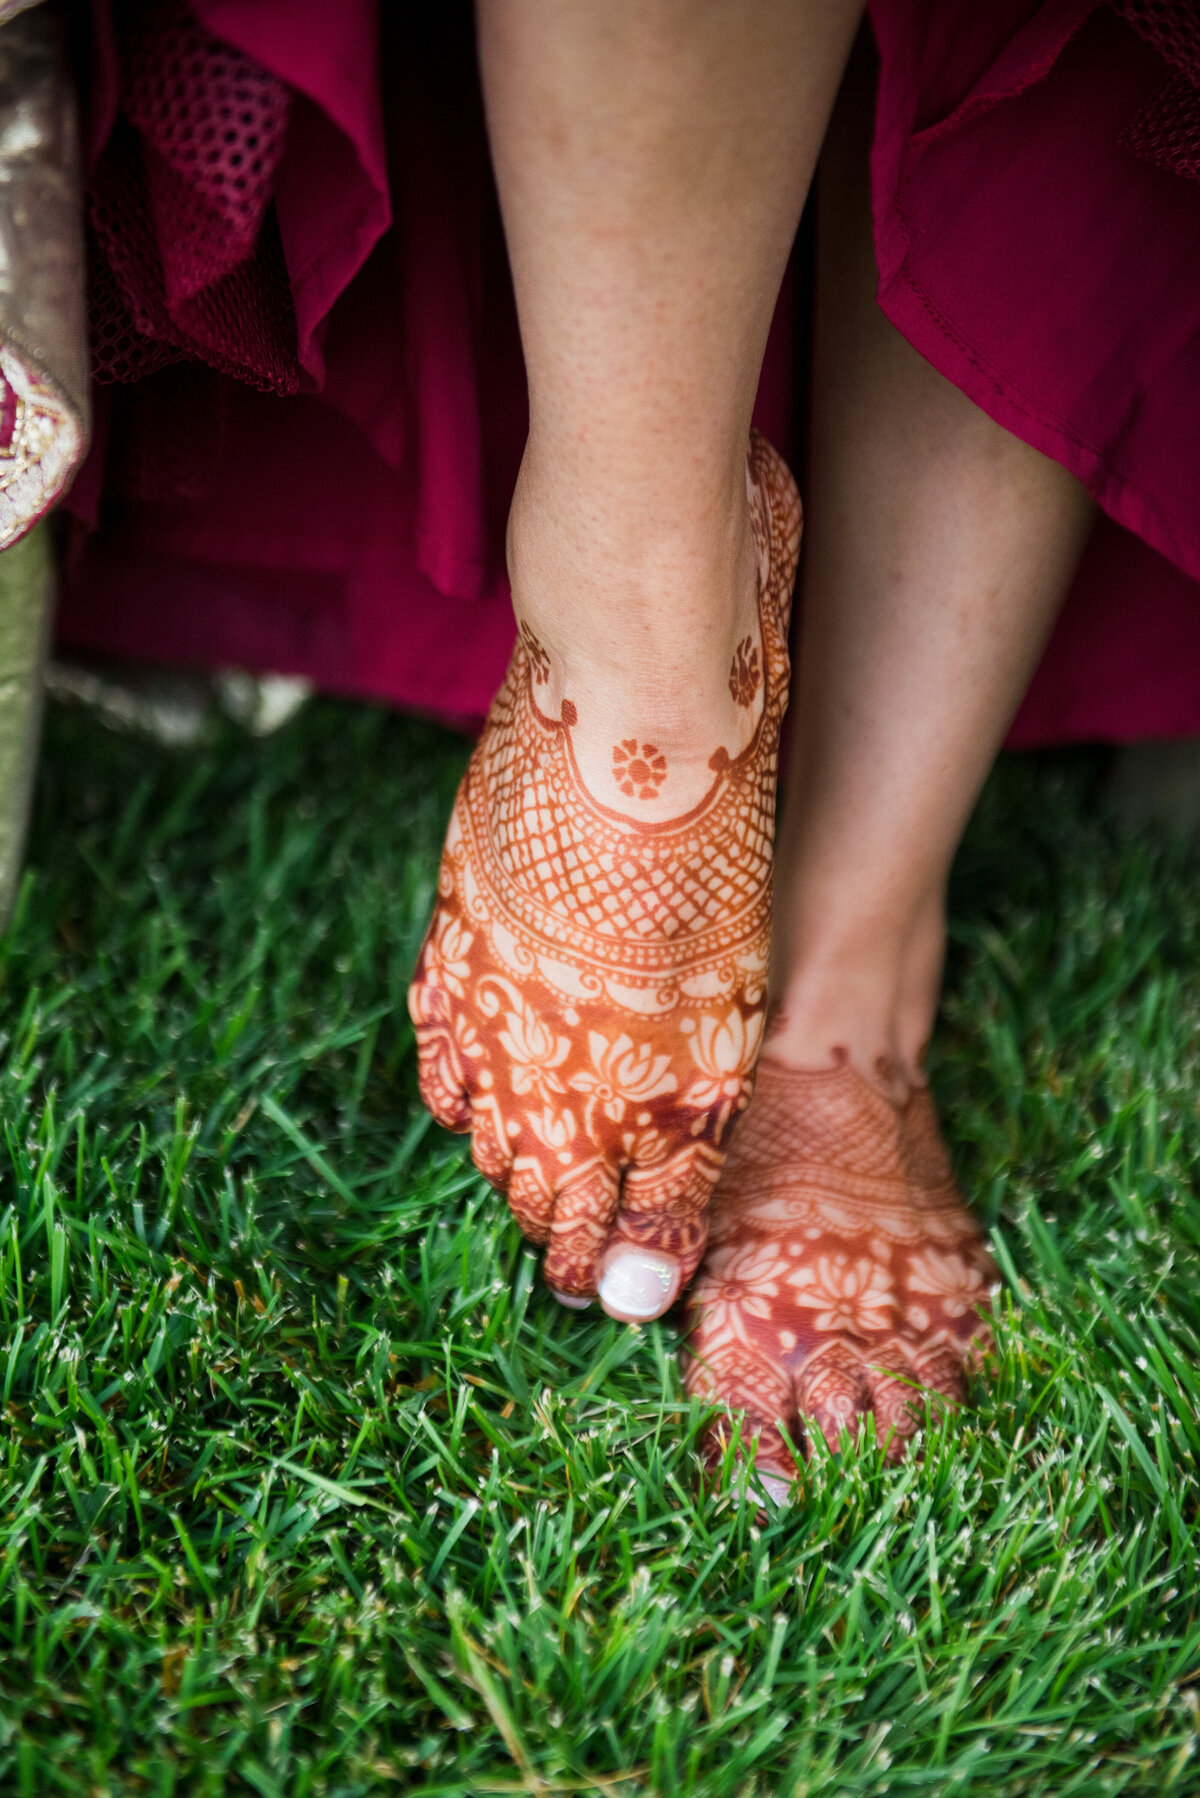 A close up shot of an Indian bride's feet covered in henna tattoo.